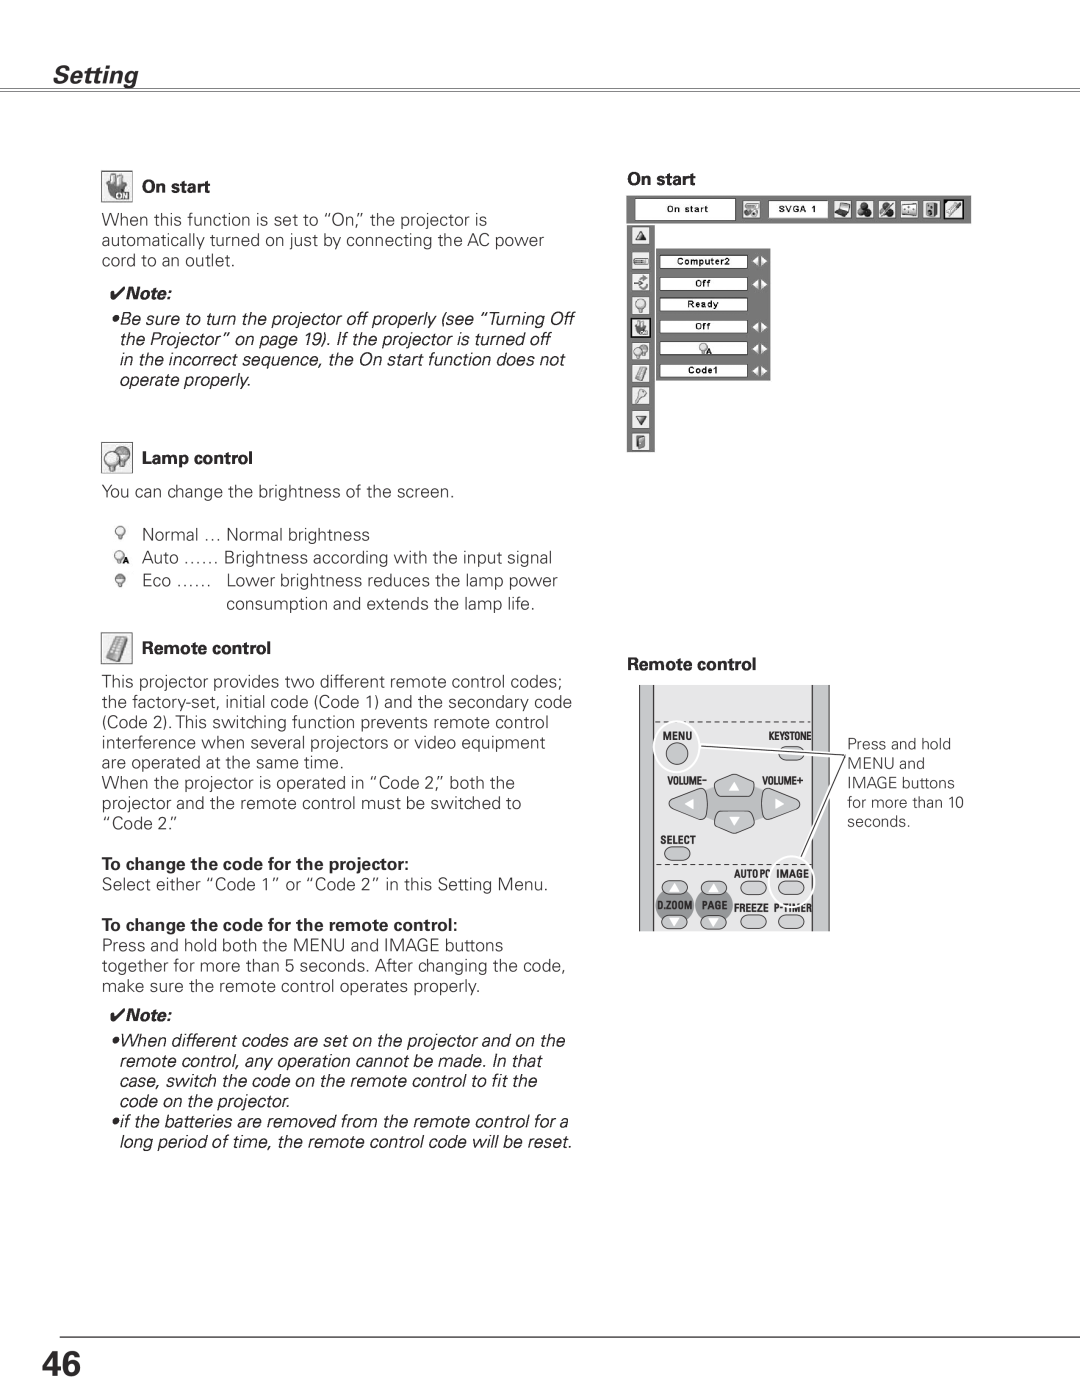 Sanyo PLC-XL45 owner manual Setting, On start, Lamp control, Remote control, To change the code for the projector 